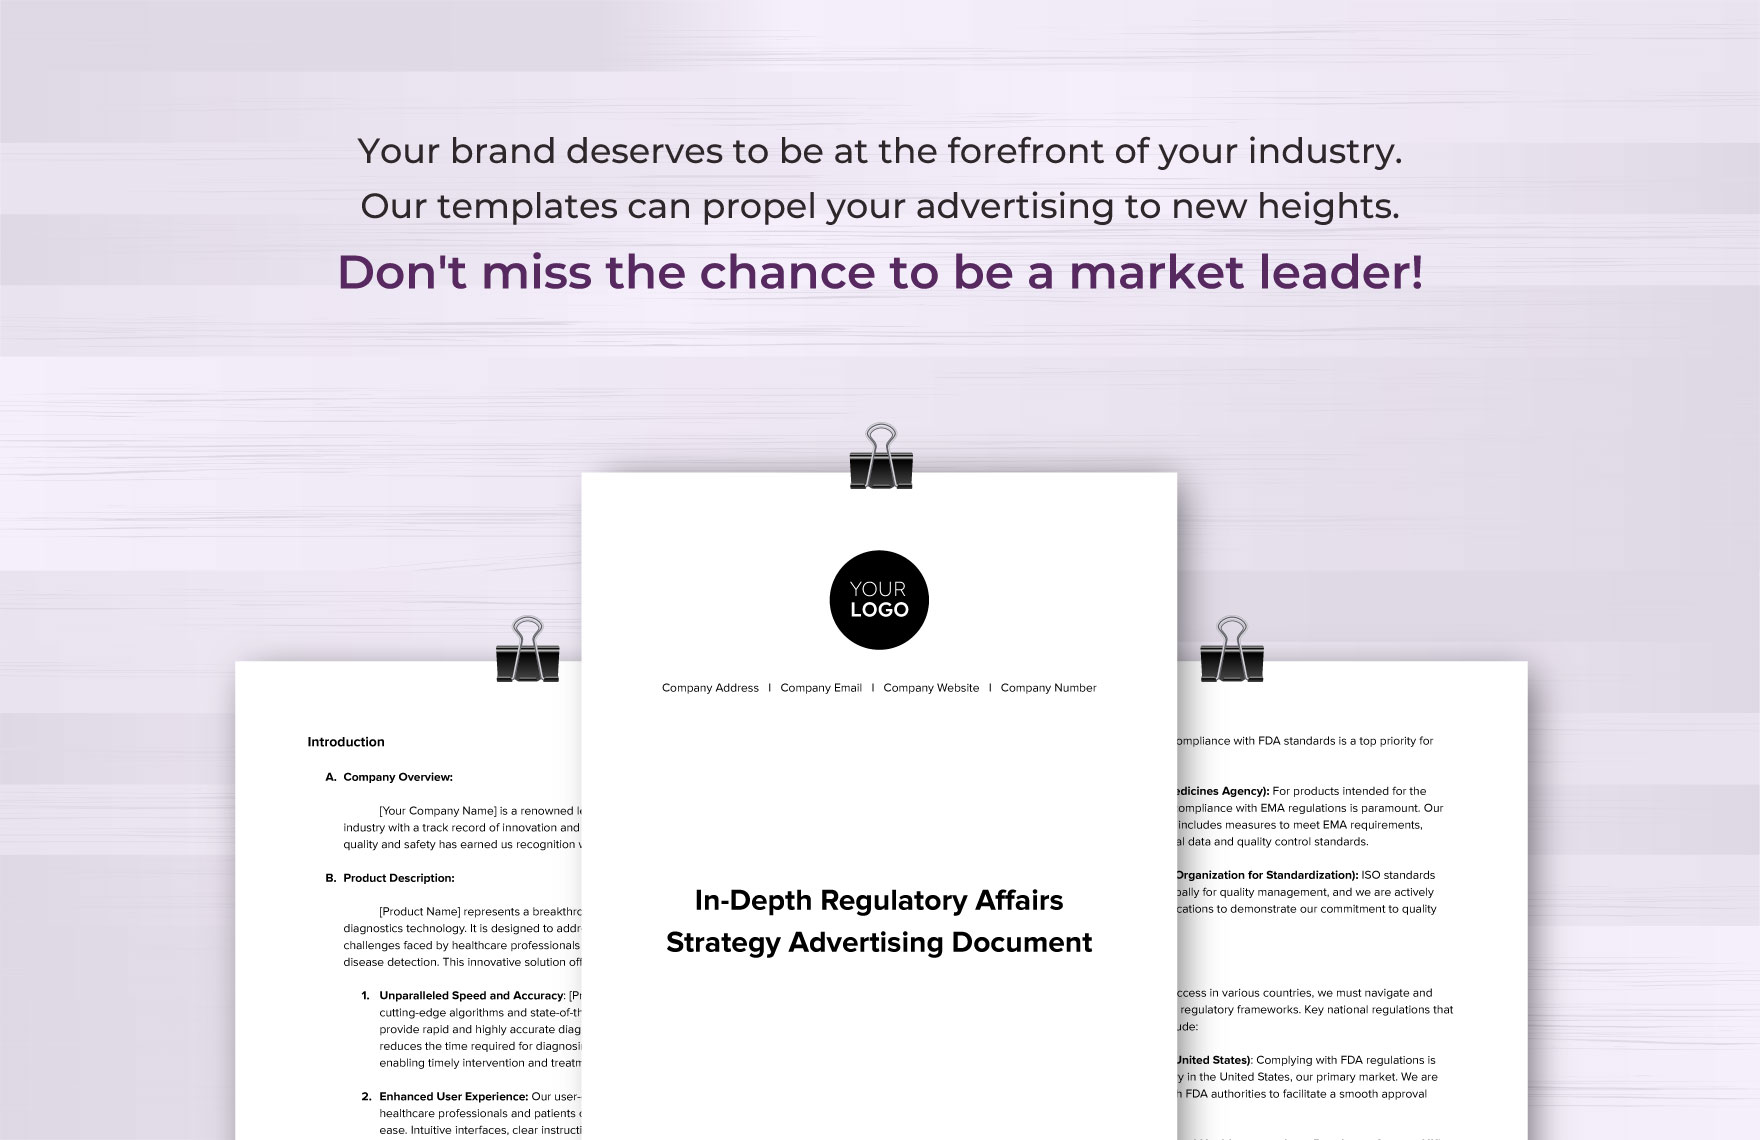 In-Depth Regulatory Affairs Strategy Advertising Document Template